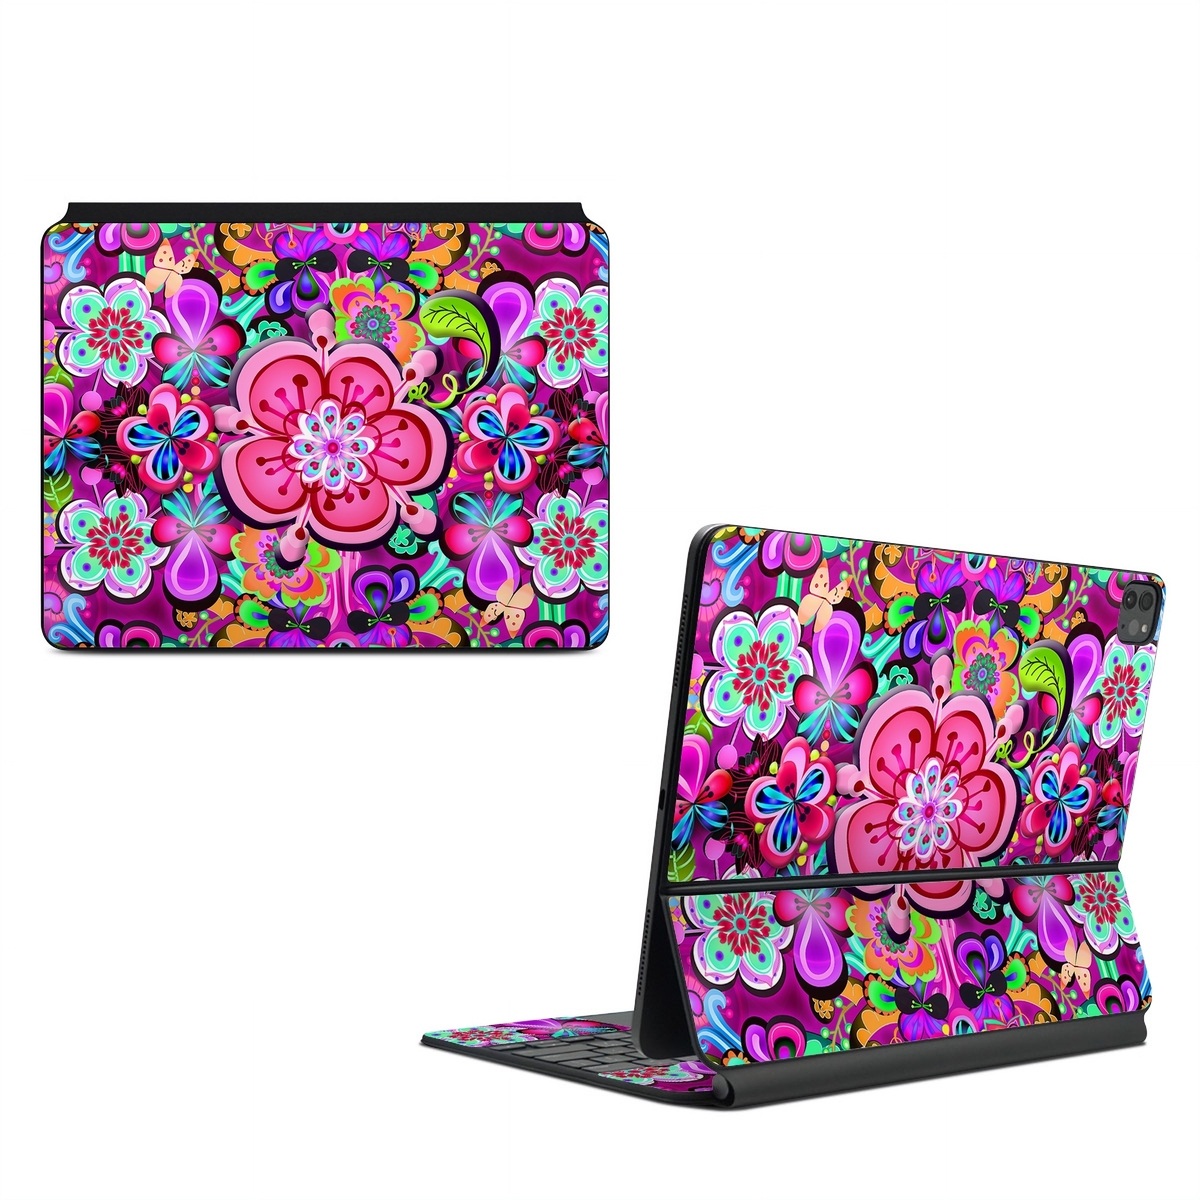 Magic Keyboard for iPad Series Skin design of Pattern, Pink, Design, Textile, Magenta, Art, Visual arts, Paisley, with purple, black, red, gray, blue colors